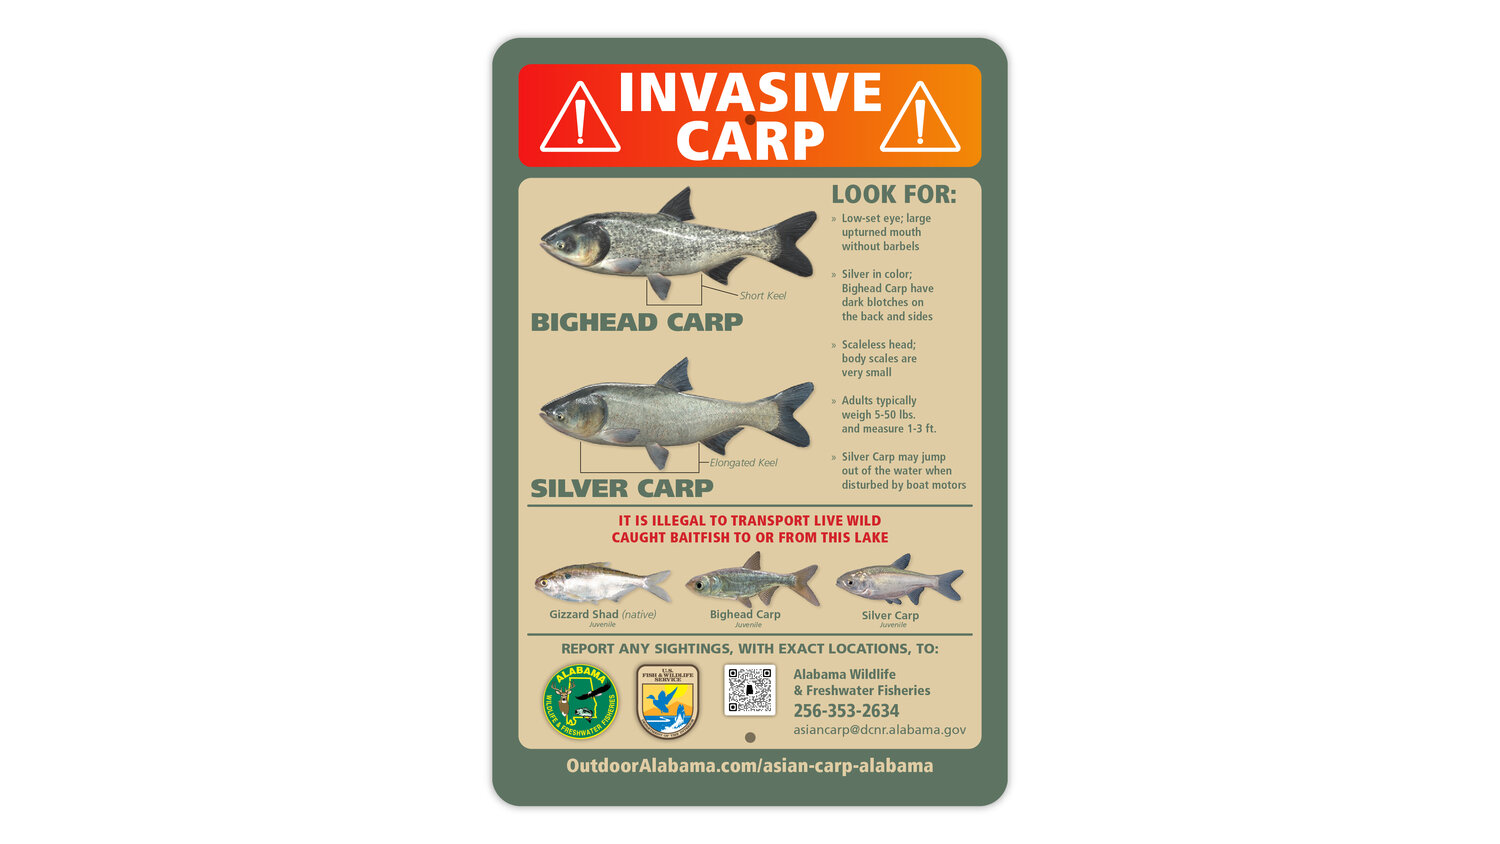 ADCNR is installing invasive carp ID signs at all public boat ramps along the Tennessee River this fall.